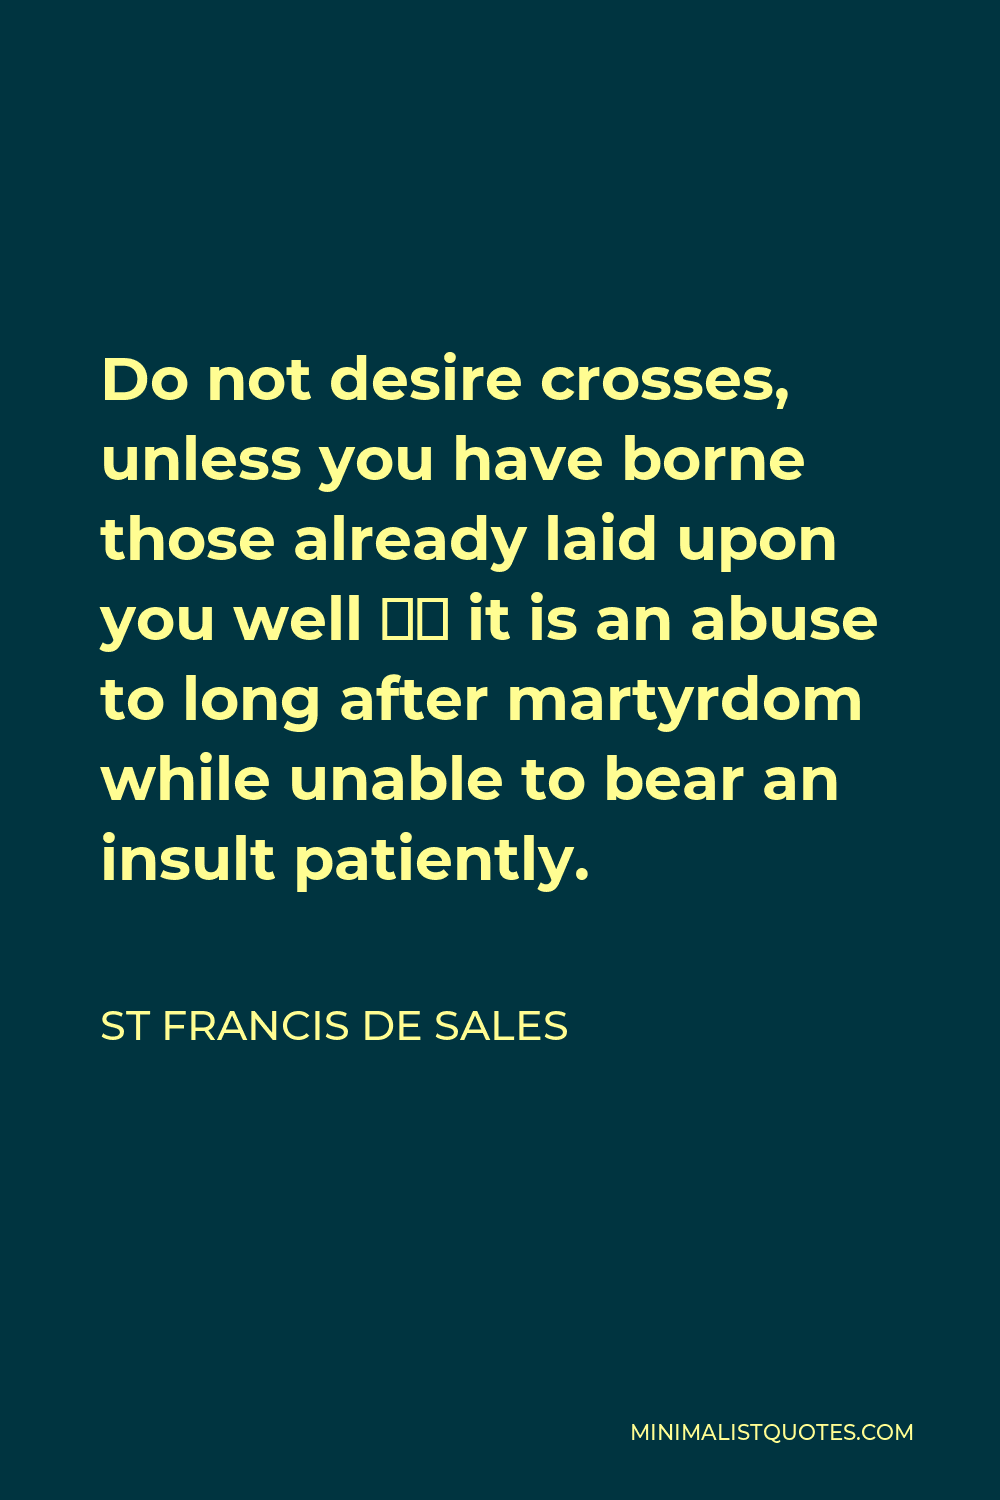 St Francis De Sales Quote - Do not desire crosses, unless you have borne those already laid upon you well — it is an abuse to long after martyrdom while unable to bear an insult patiently.